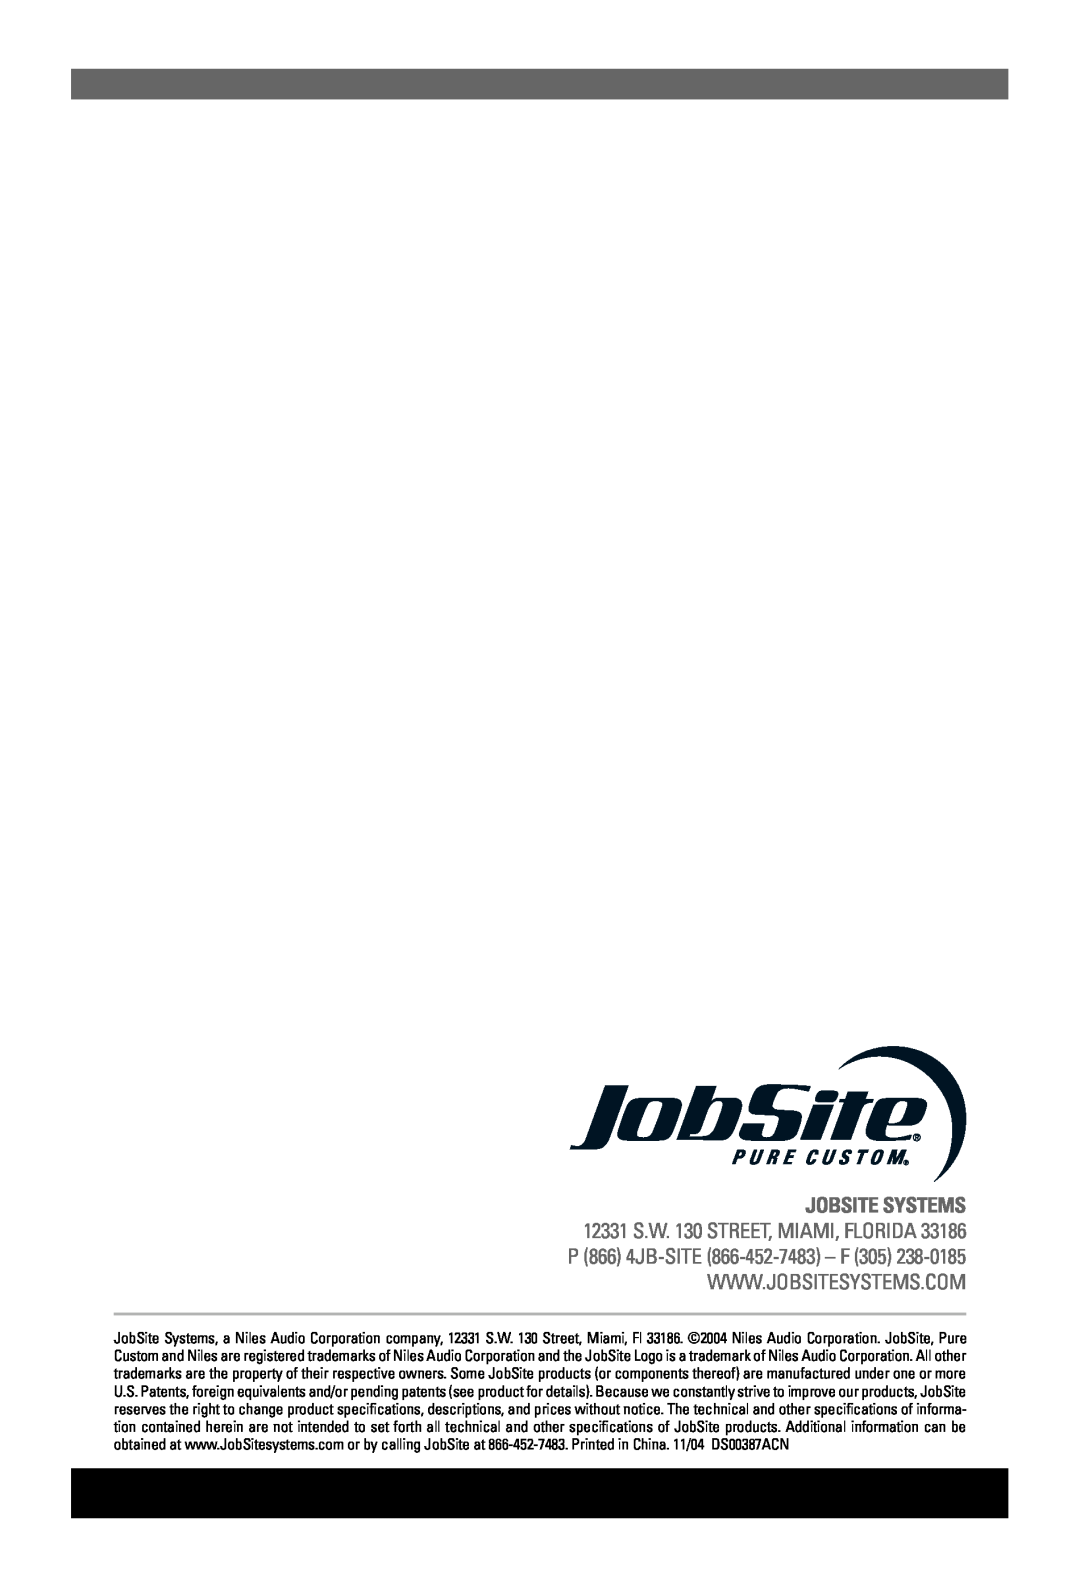 JobSite Systems LSW-6.5 manual 